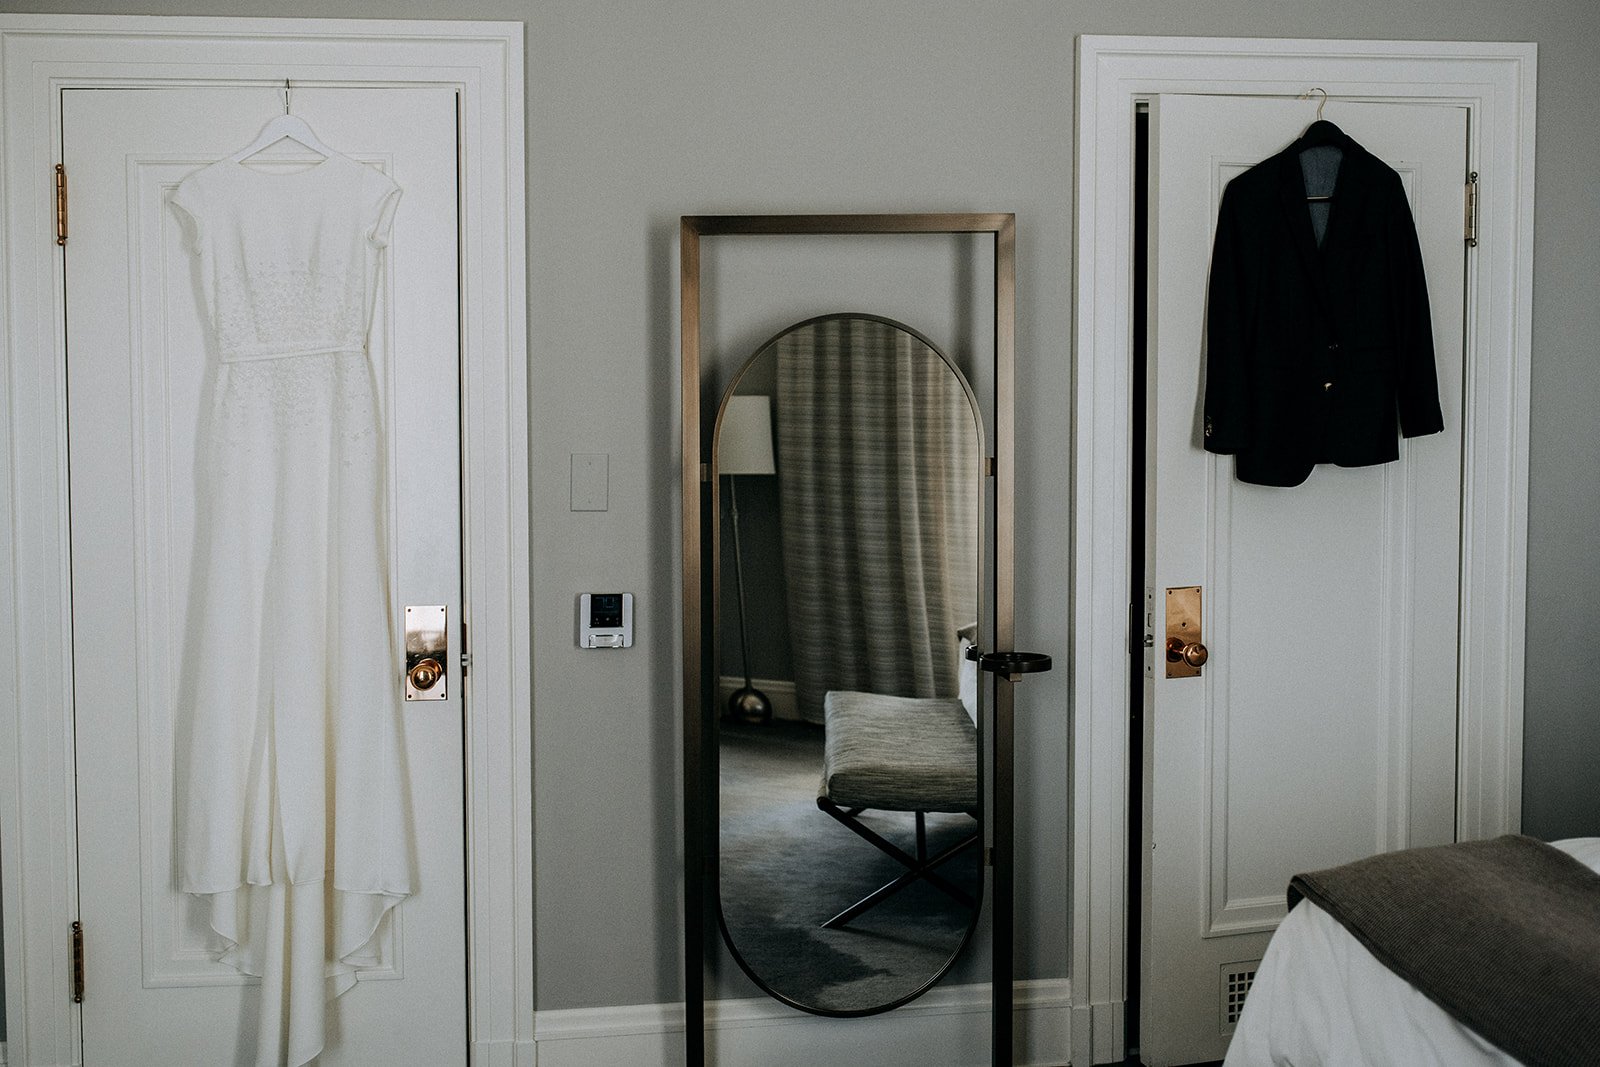  wedding dress and suit jacket hanging in front of closet with mirror 